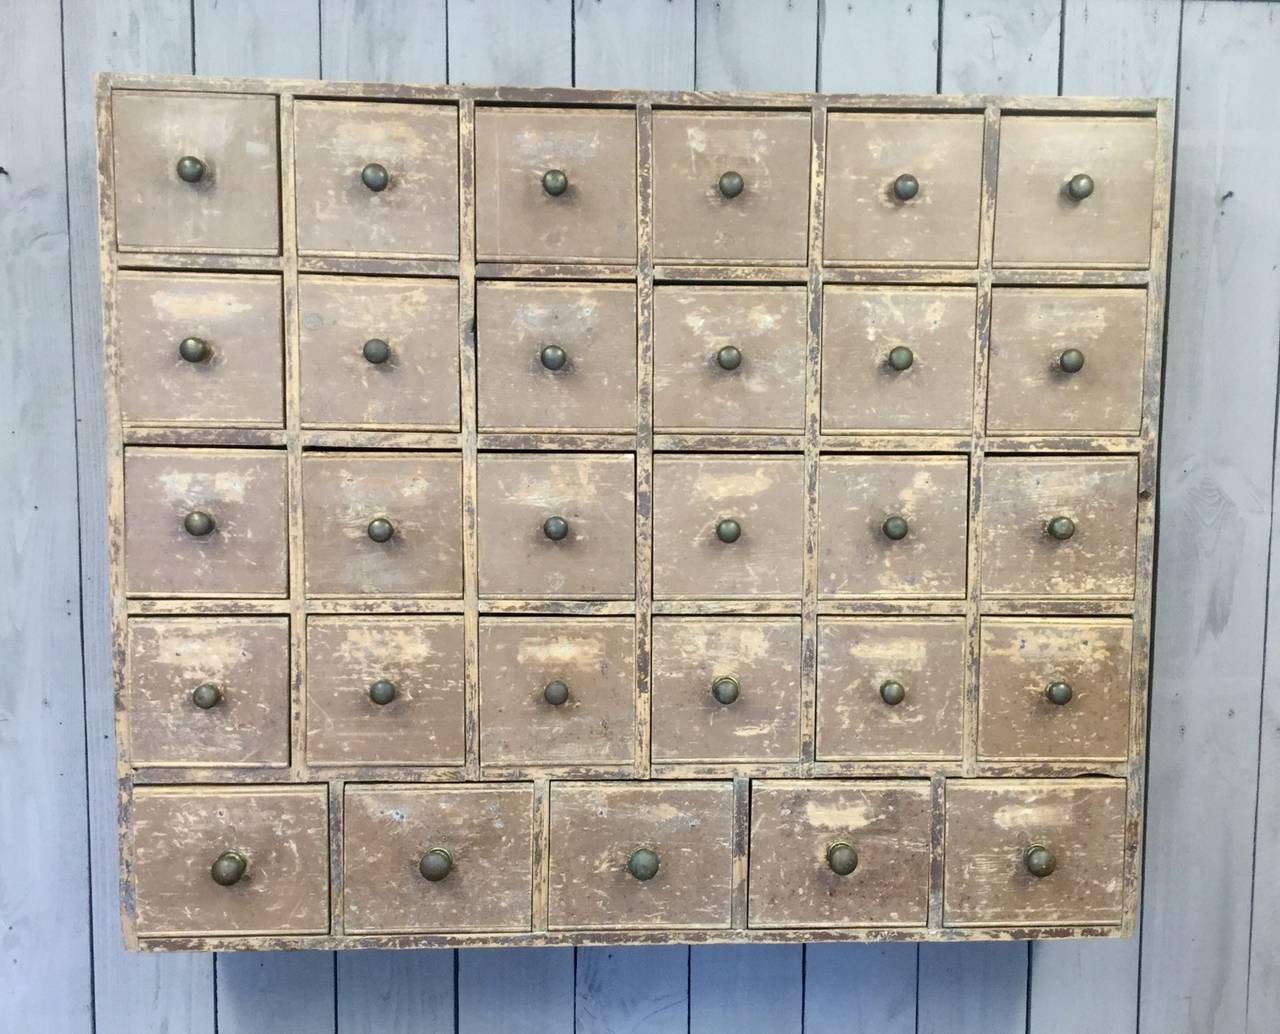 An original wall-mounted cabinet from an English seed merchant's shop.  This cabinet is in excellent condition and has been hand-scraped to reveal the original paint.  It features 29 drawers with the original brass pulls.  This is a fabulous